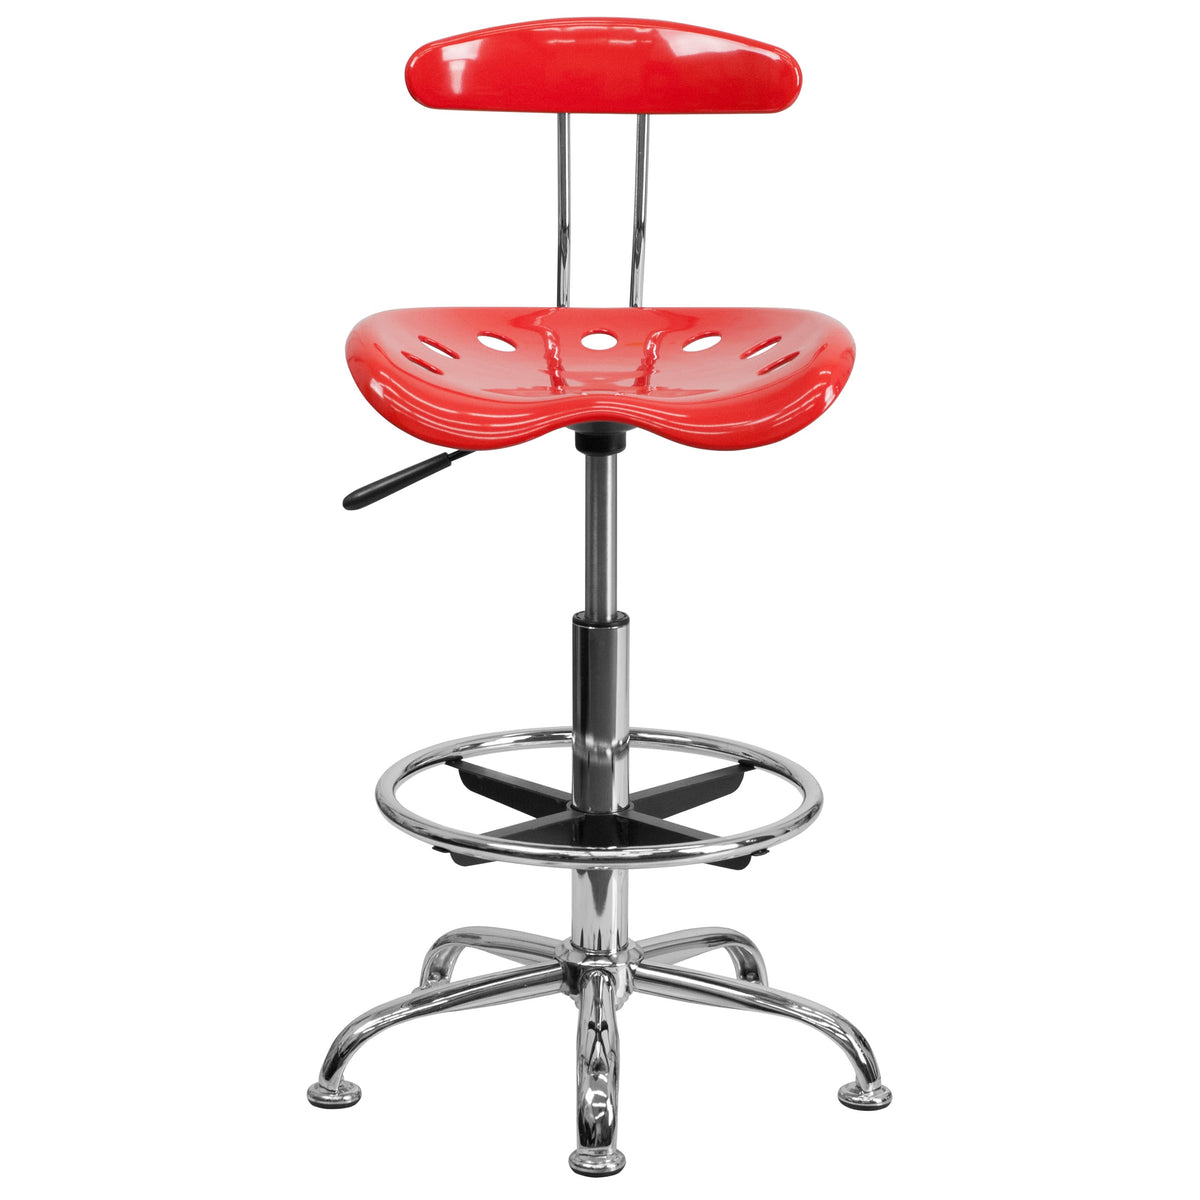 Cherry Tomato |#| Vibrant Cherry Tomato and Chrome Drafting Stool with Tractor Seat